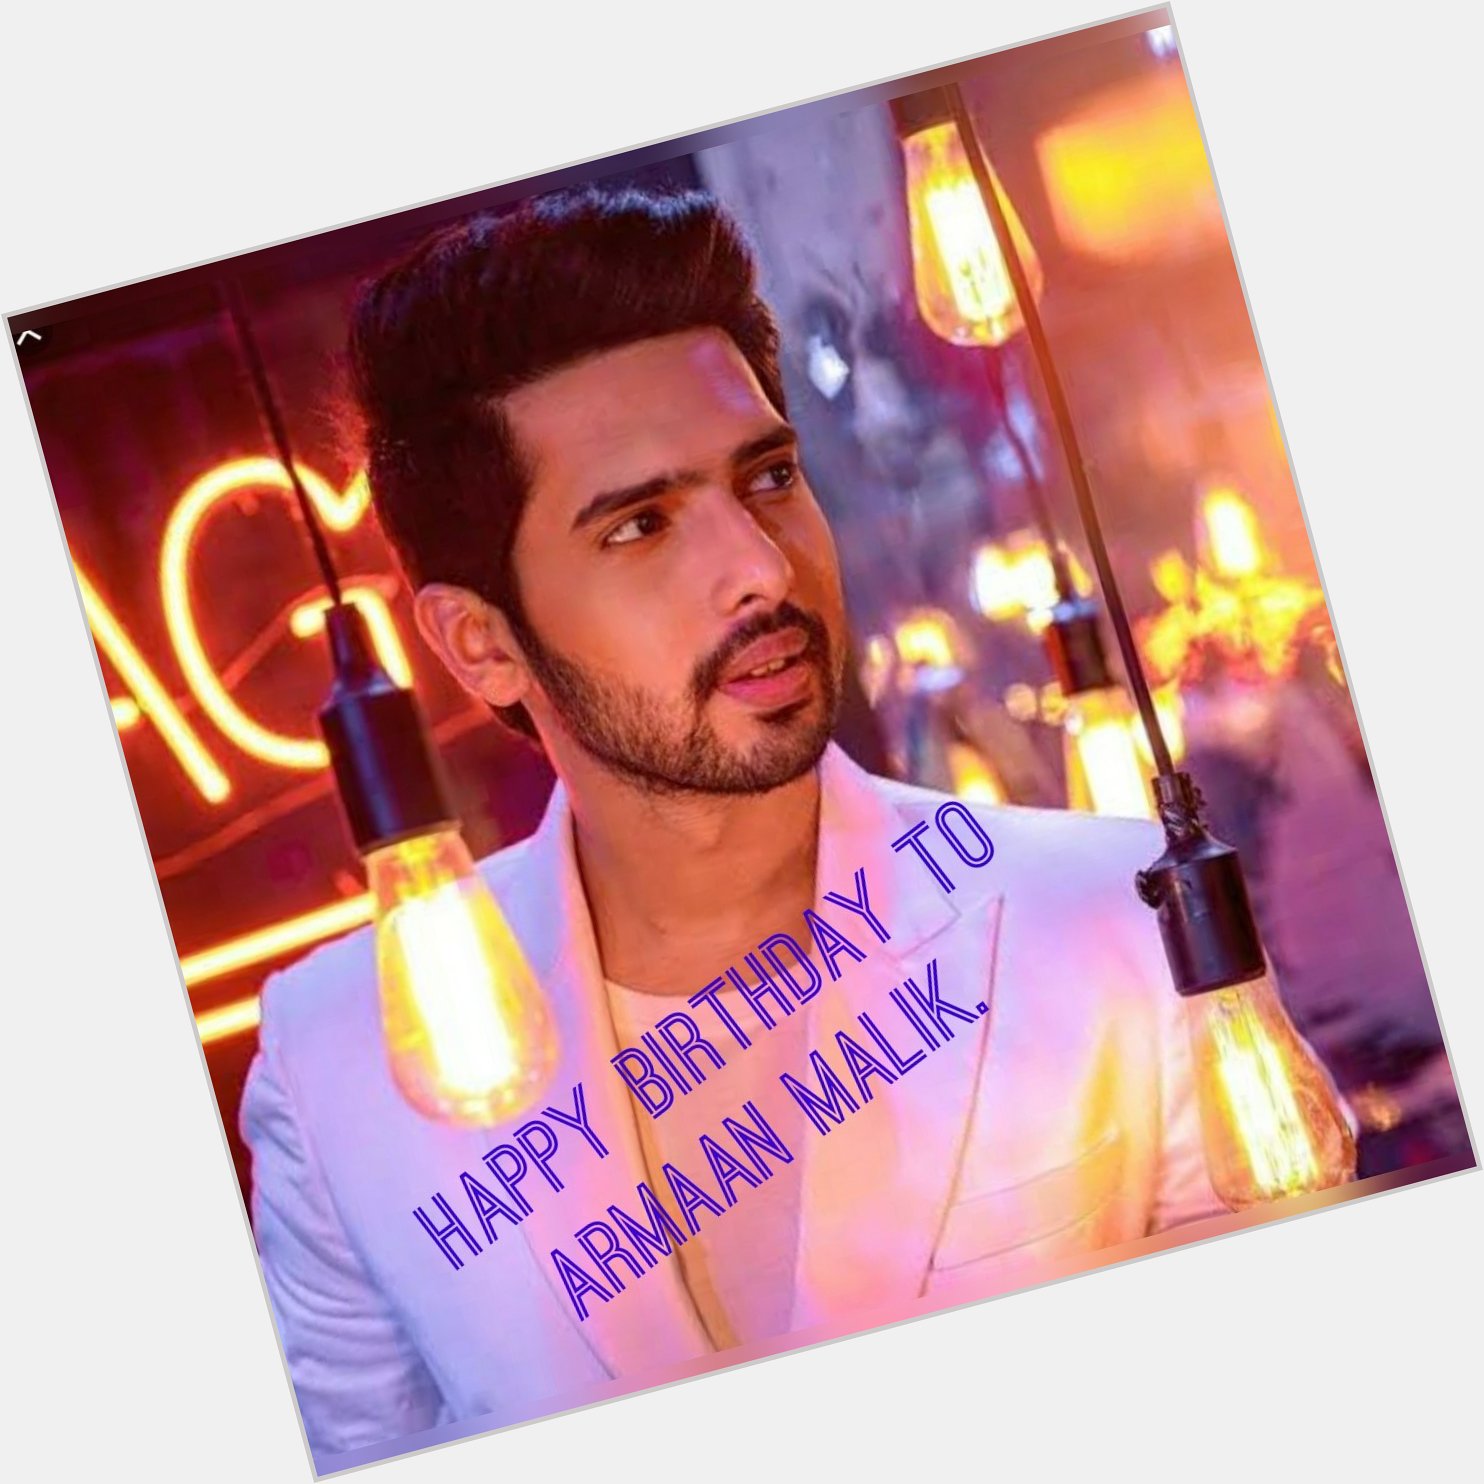 Happy birthday to Armaan malik. 
May you have a lot of hapiness in your life. 